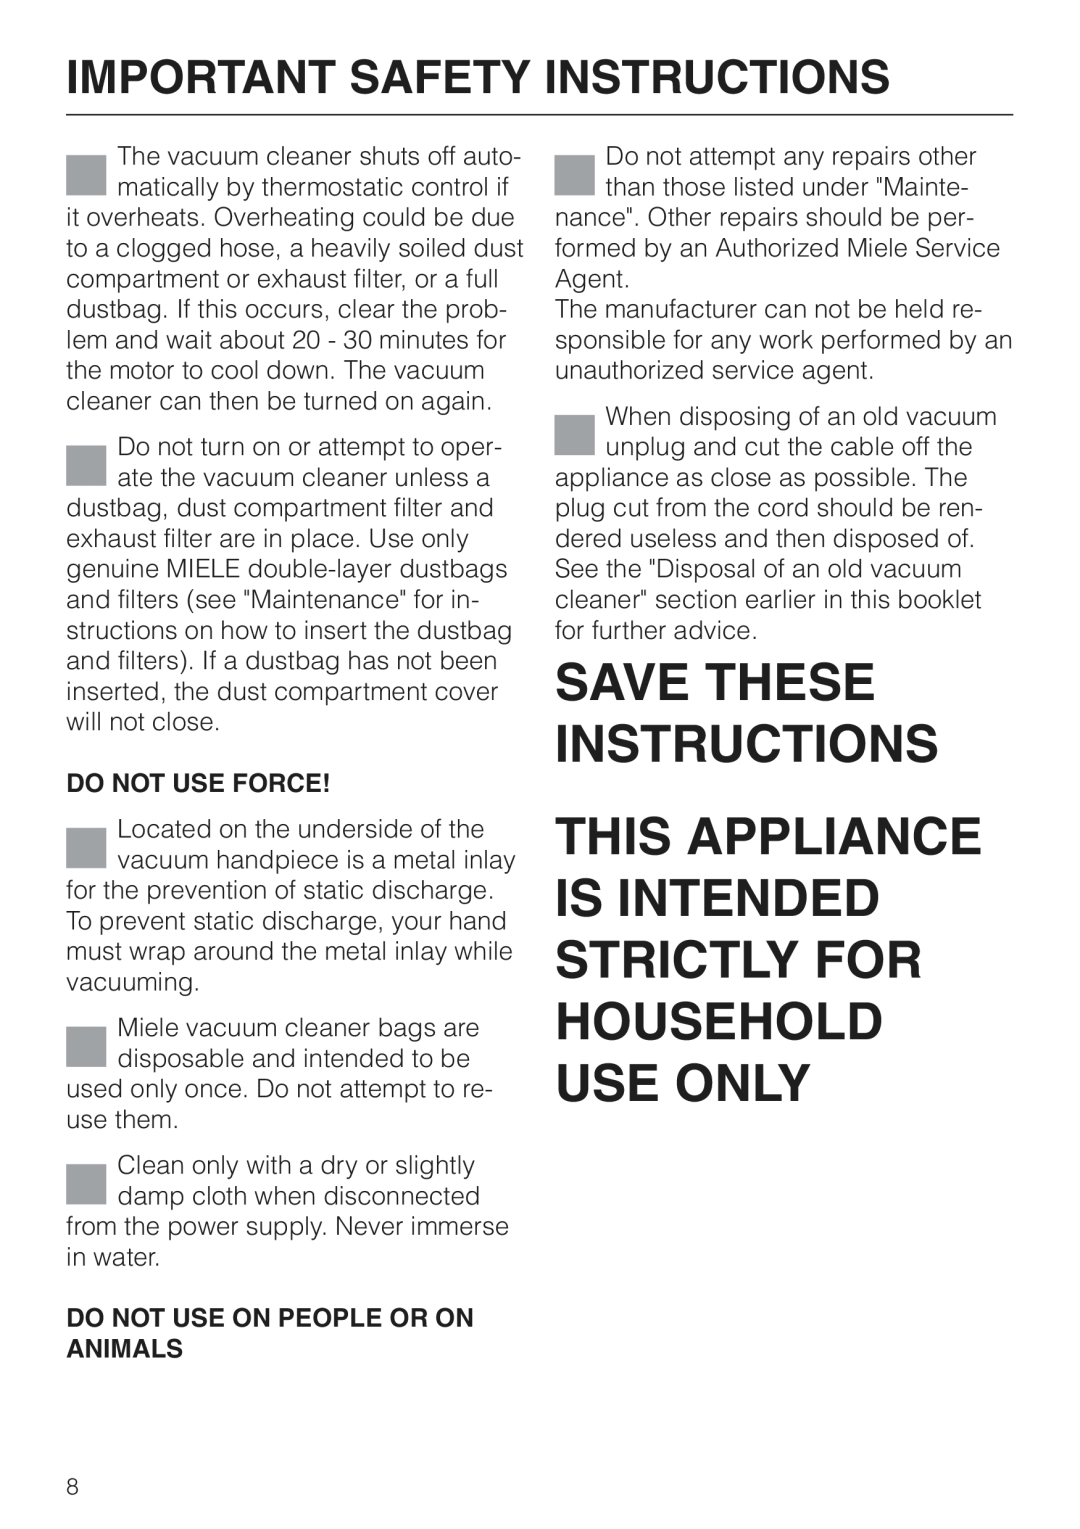 Miele S 500 - S 548, S 600 - S 648 manual Save These Instructions, Important Safety Instructions, Do Not Use Force 